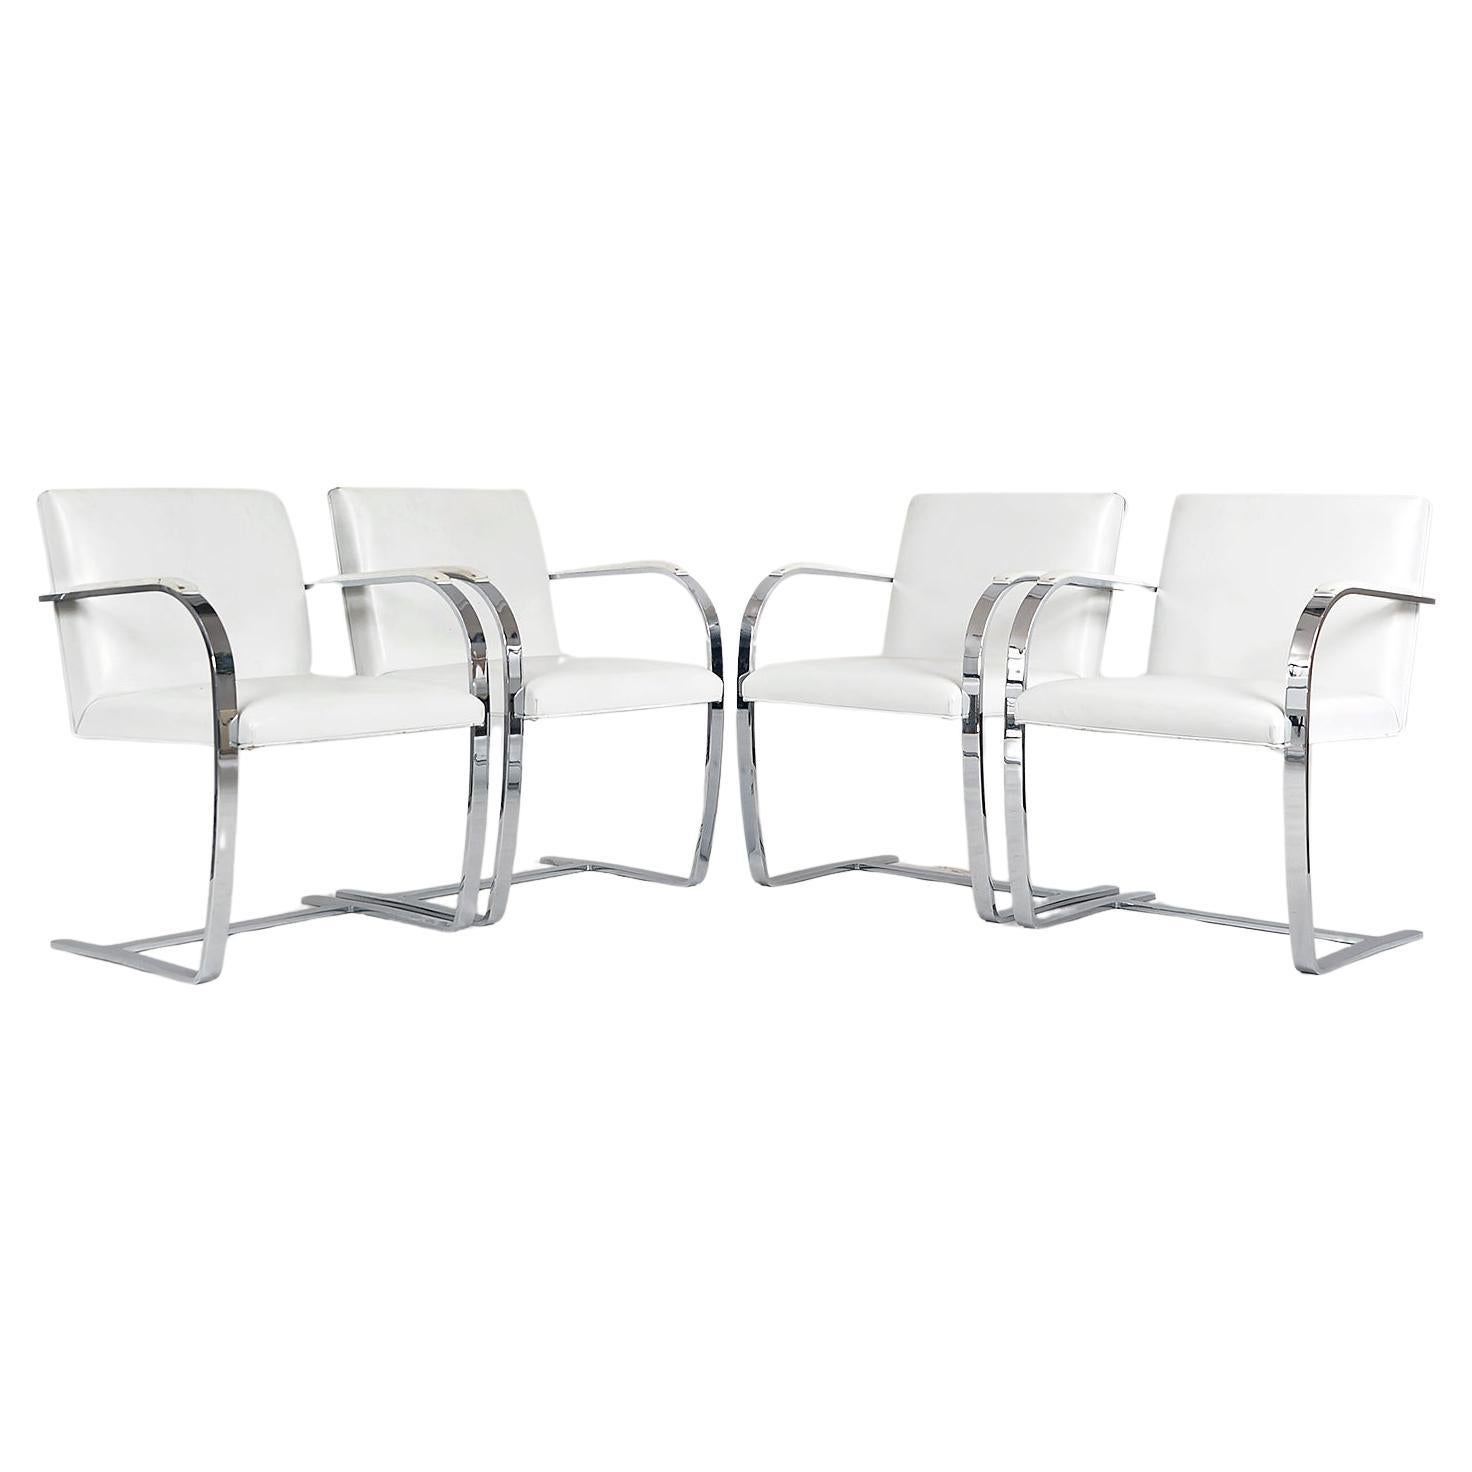 Set 4 Mies van der Rohe Knoll Brno Flat Bar 255 Cantilever Dining Chairs White